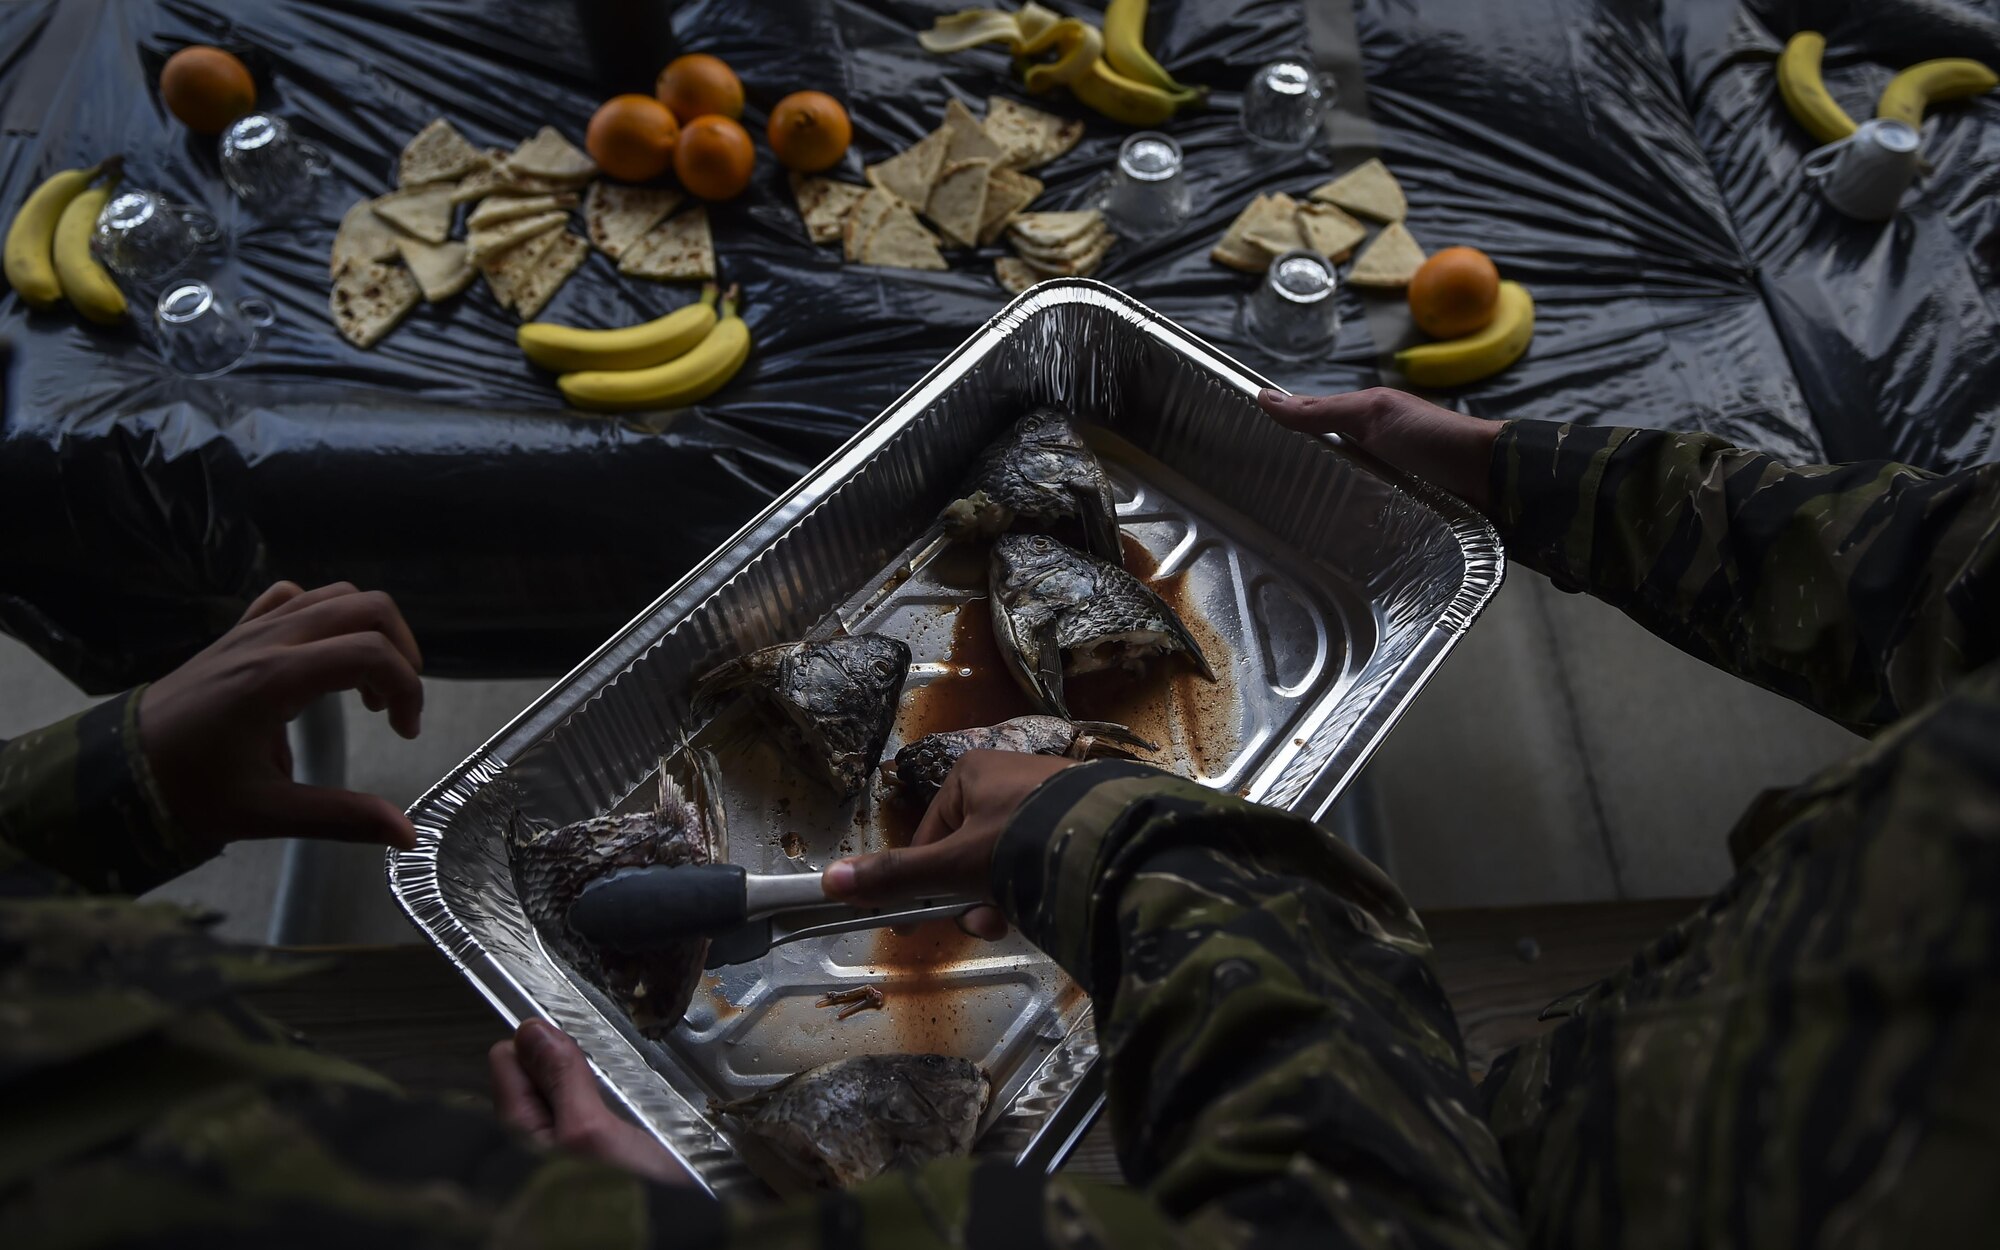 “Palmetto Land” soldiers serve fish heads to 6th Special Operations Squadron combat aviation advisor students during Operation Raven Claw at Duke Field, Fla., April 26, 2017. “Palmetto Land” is a simulated indigenous country where students were tasked to train and assist the "Palmetto Land" forces in enhancing the tactical employment of its aircraft and soldiers. (U.S. Air Force photo by Airman 1st Class Joseph Pick)